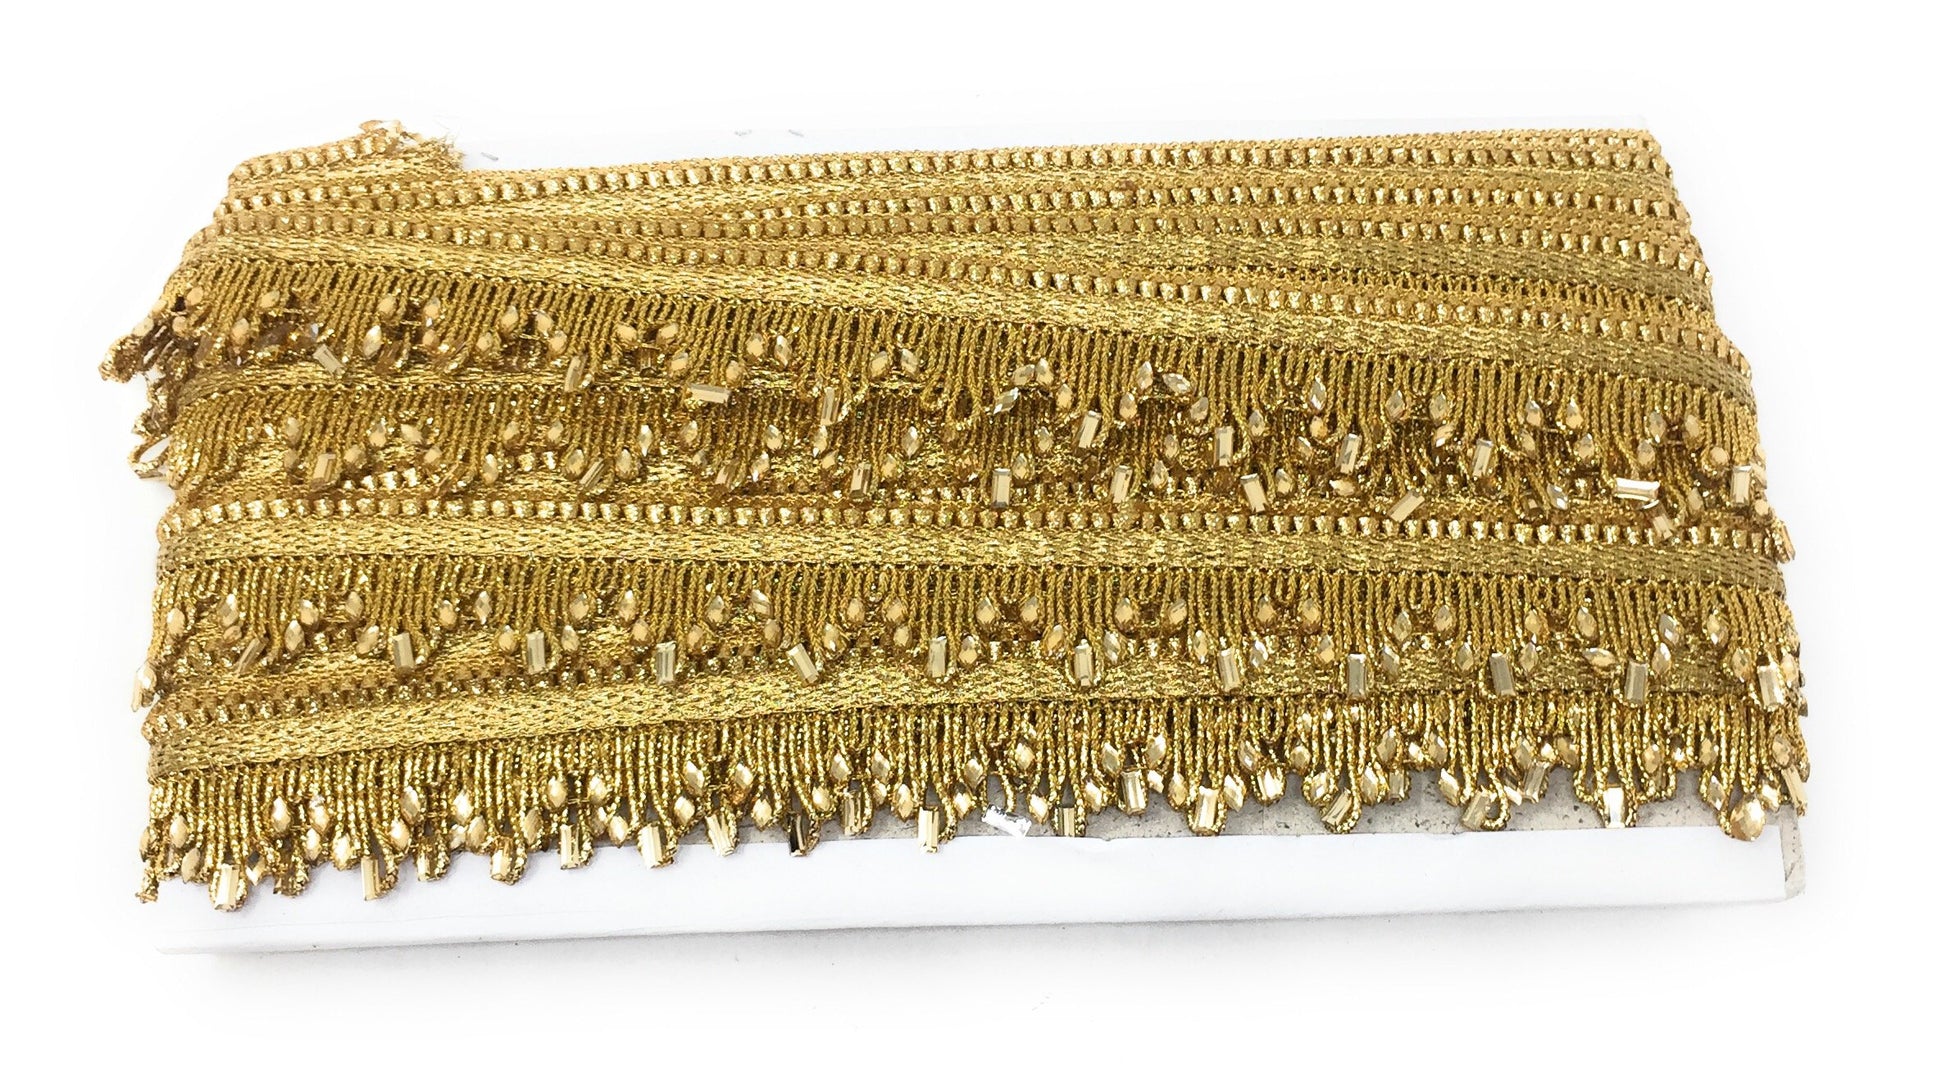 Gold Beaded Embroidered Saree Border Trim - 9 Meter Roll